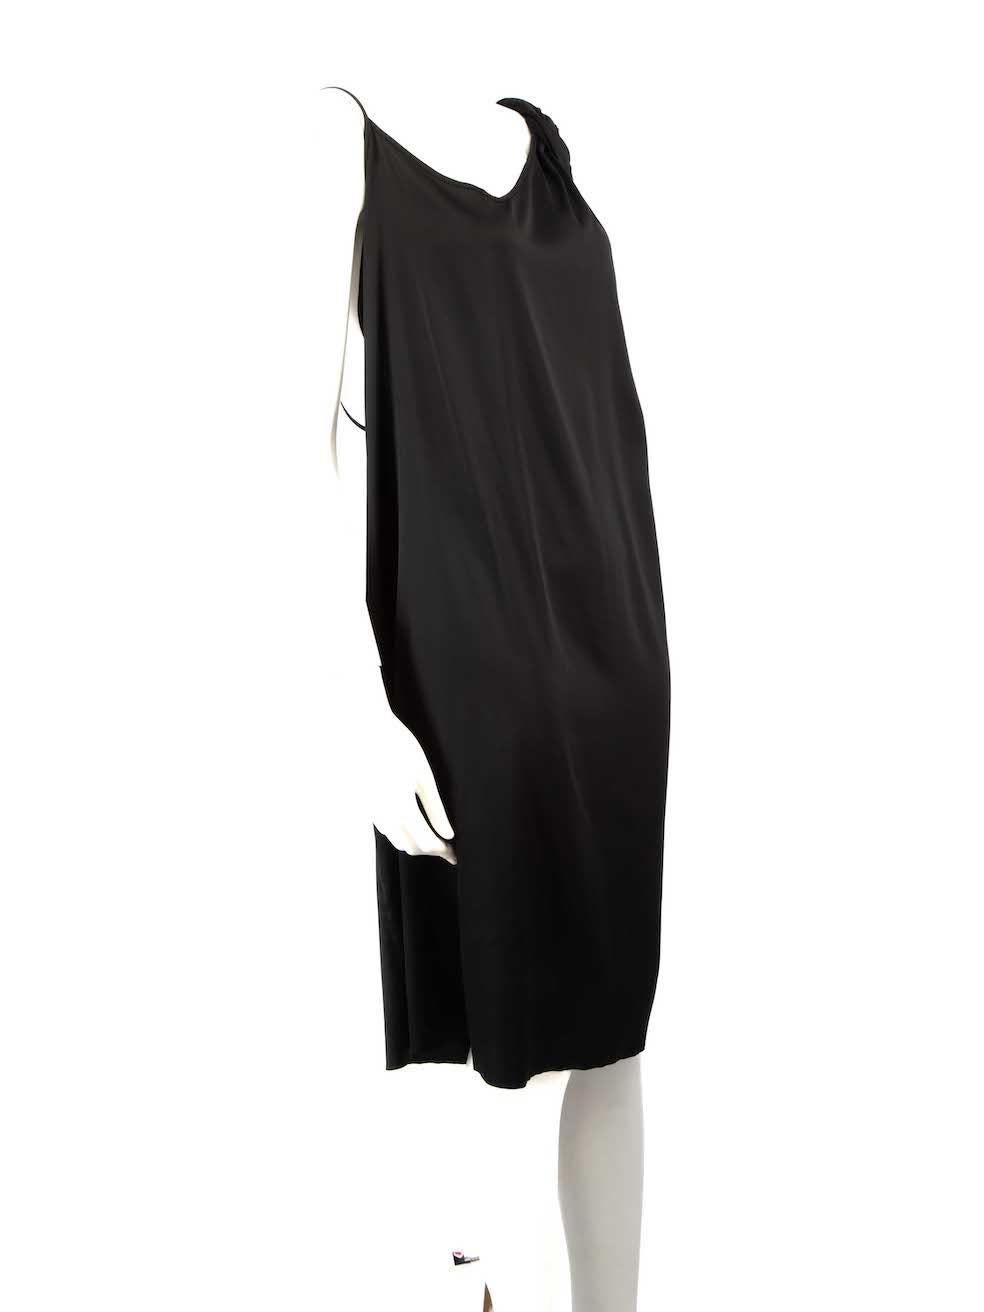 CONDITION is Very good. Hardly any visible wear to dress is evident on this used Acne Studios designer resale item.
 
 
 
 Details
 
 
 Black
 
 Polyester
 
 Dress
 
 Knee length
 
 Sleeveless
 
 Braided strap
 
 Round neck
 
 
 
 
 
 Made in China
